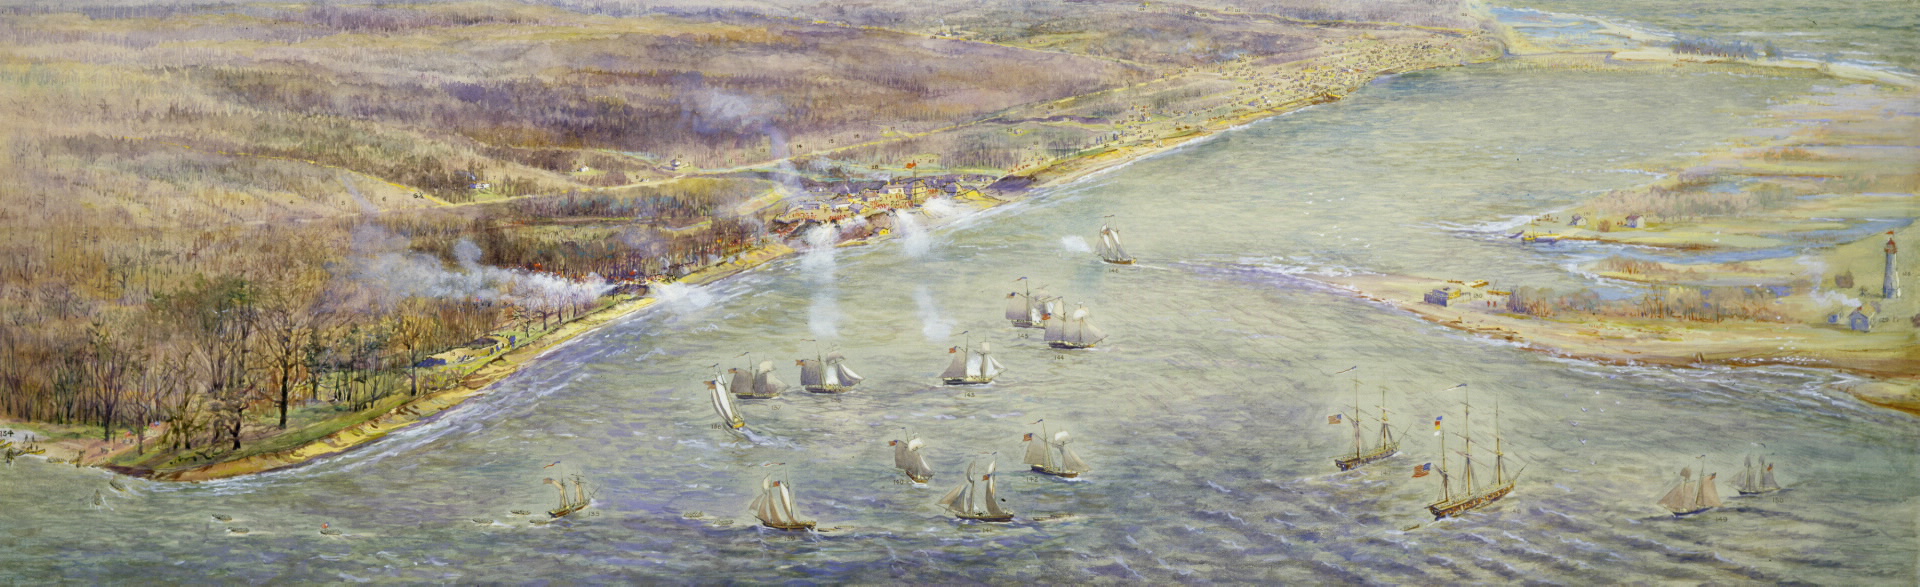 An American squadron exchanging fire with Fort York during the Battle of York, 1813. The American landing is depicted to the west (left foreground).